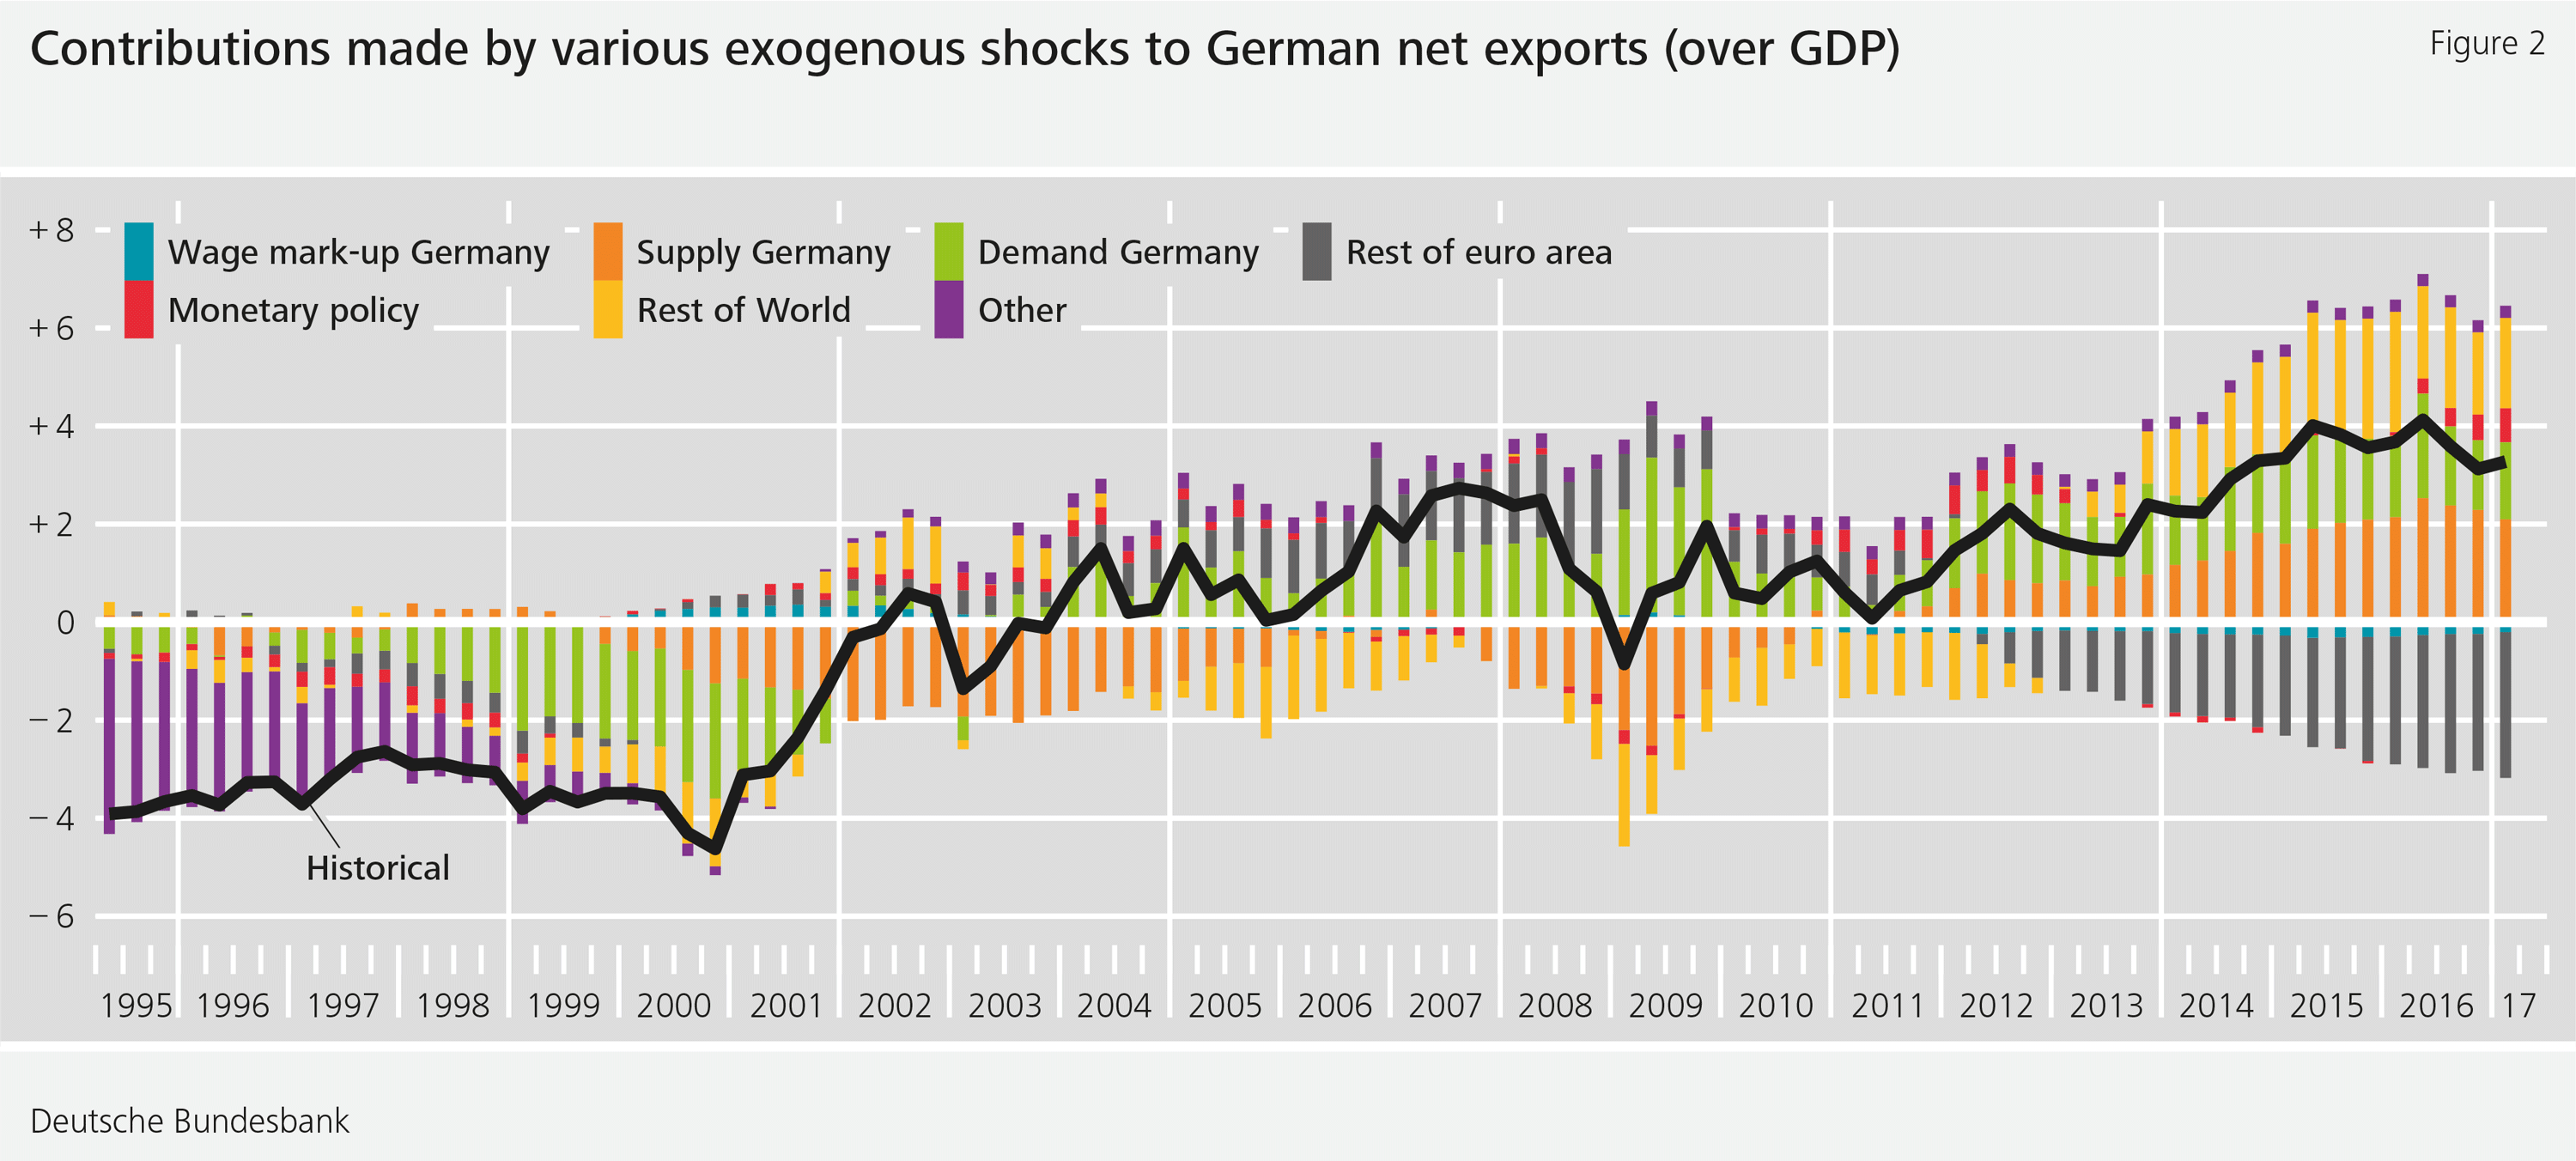 Figure 2: Contributions made by various exogenous shocks to German net exports (over GDP)